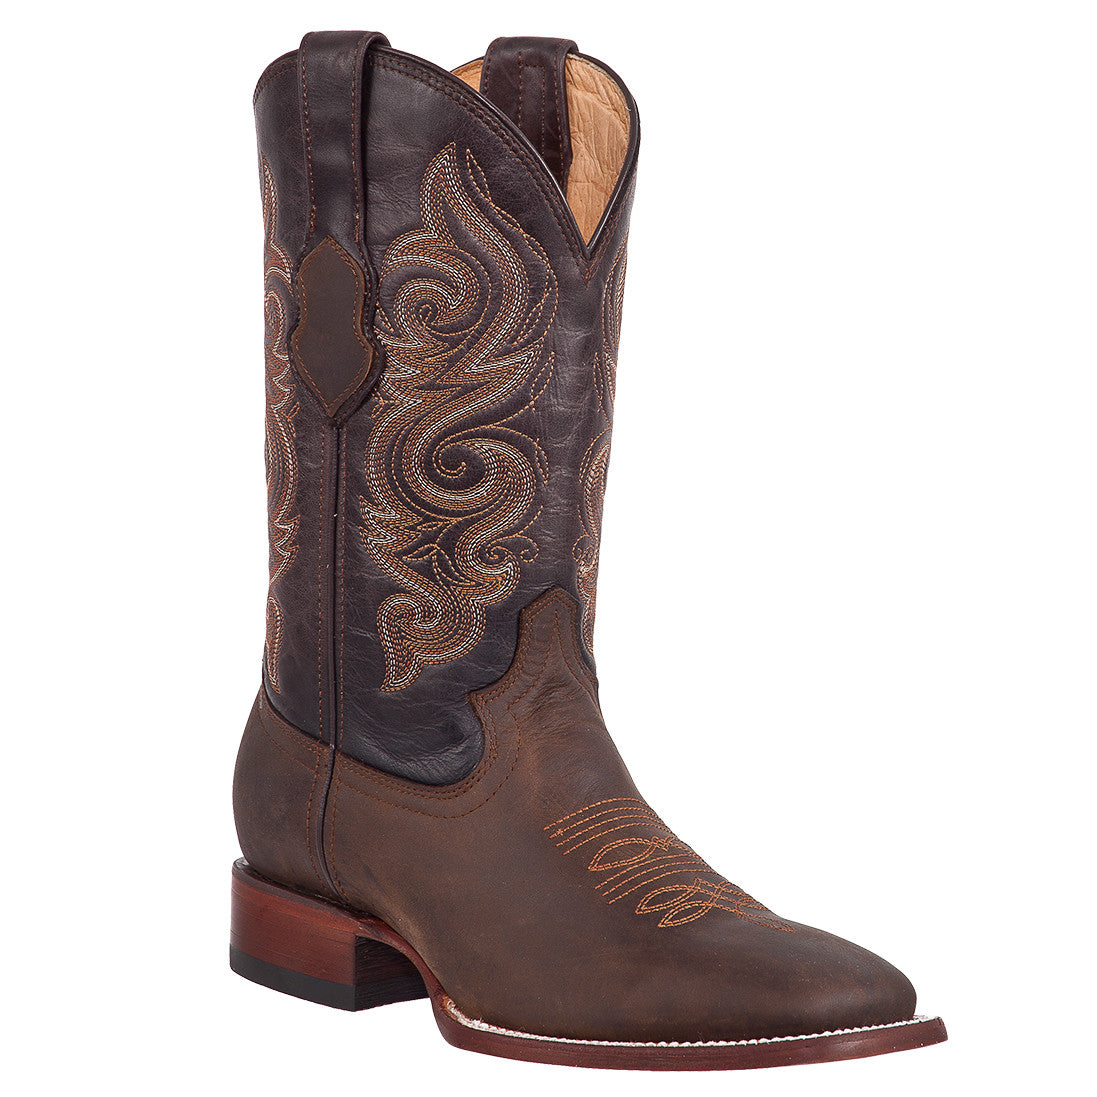 image of Quincy Men's Wide Square Toe Boots.